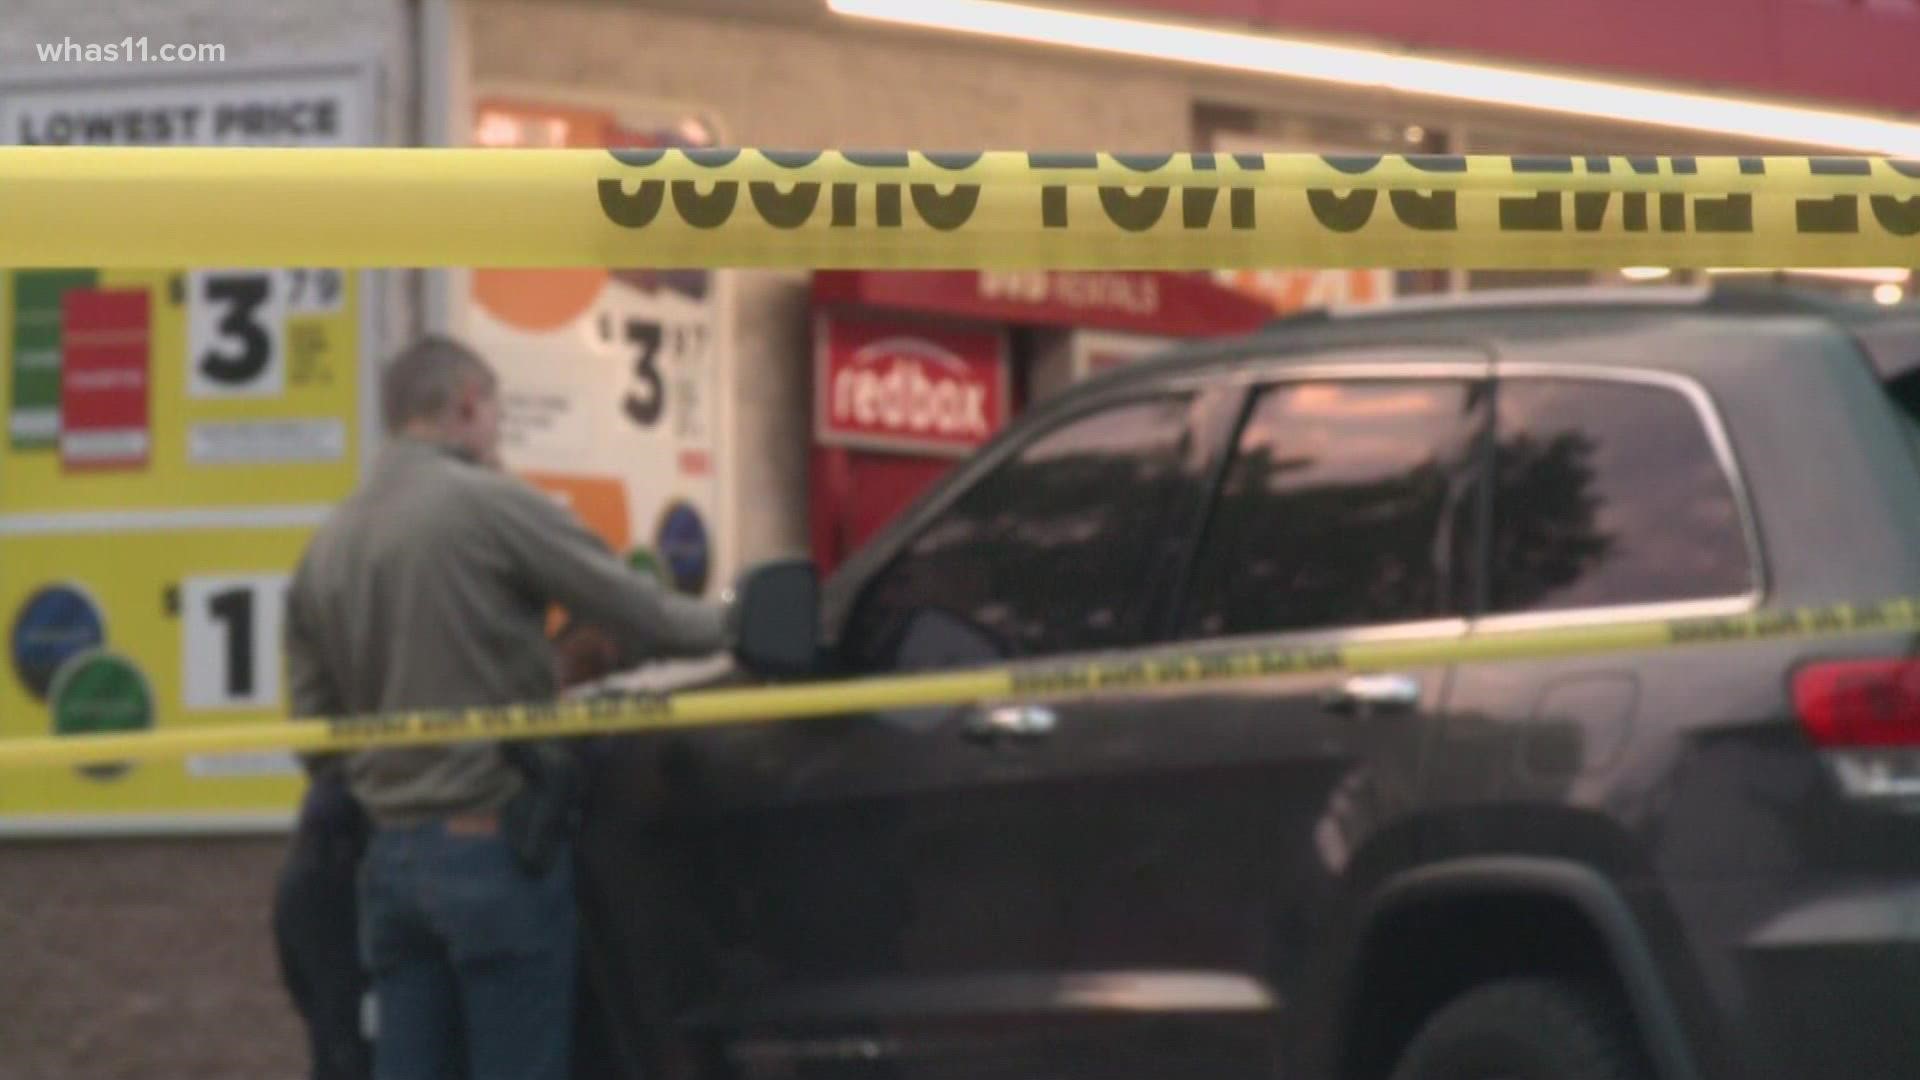 The coroner has identified the man they said was shot and killed in the parking lot of a Circle K on South Third Street early Saturday.